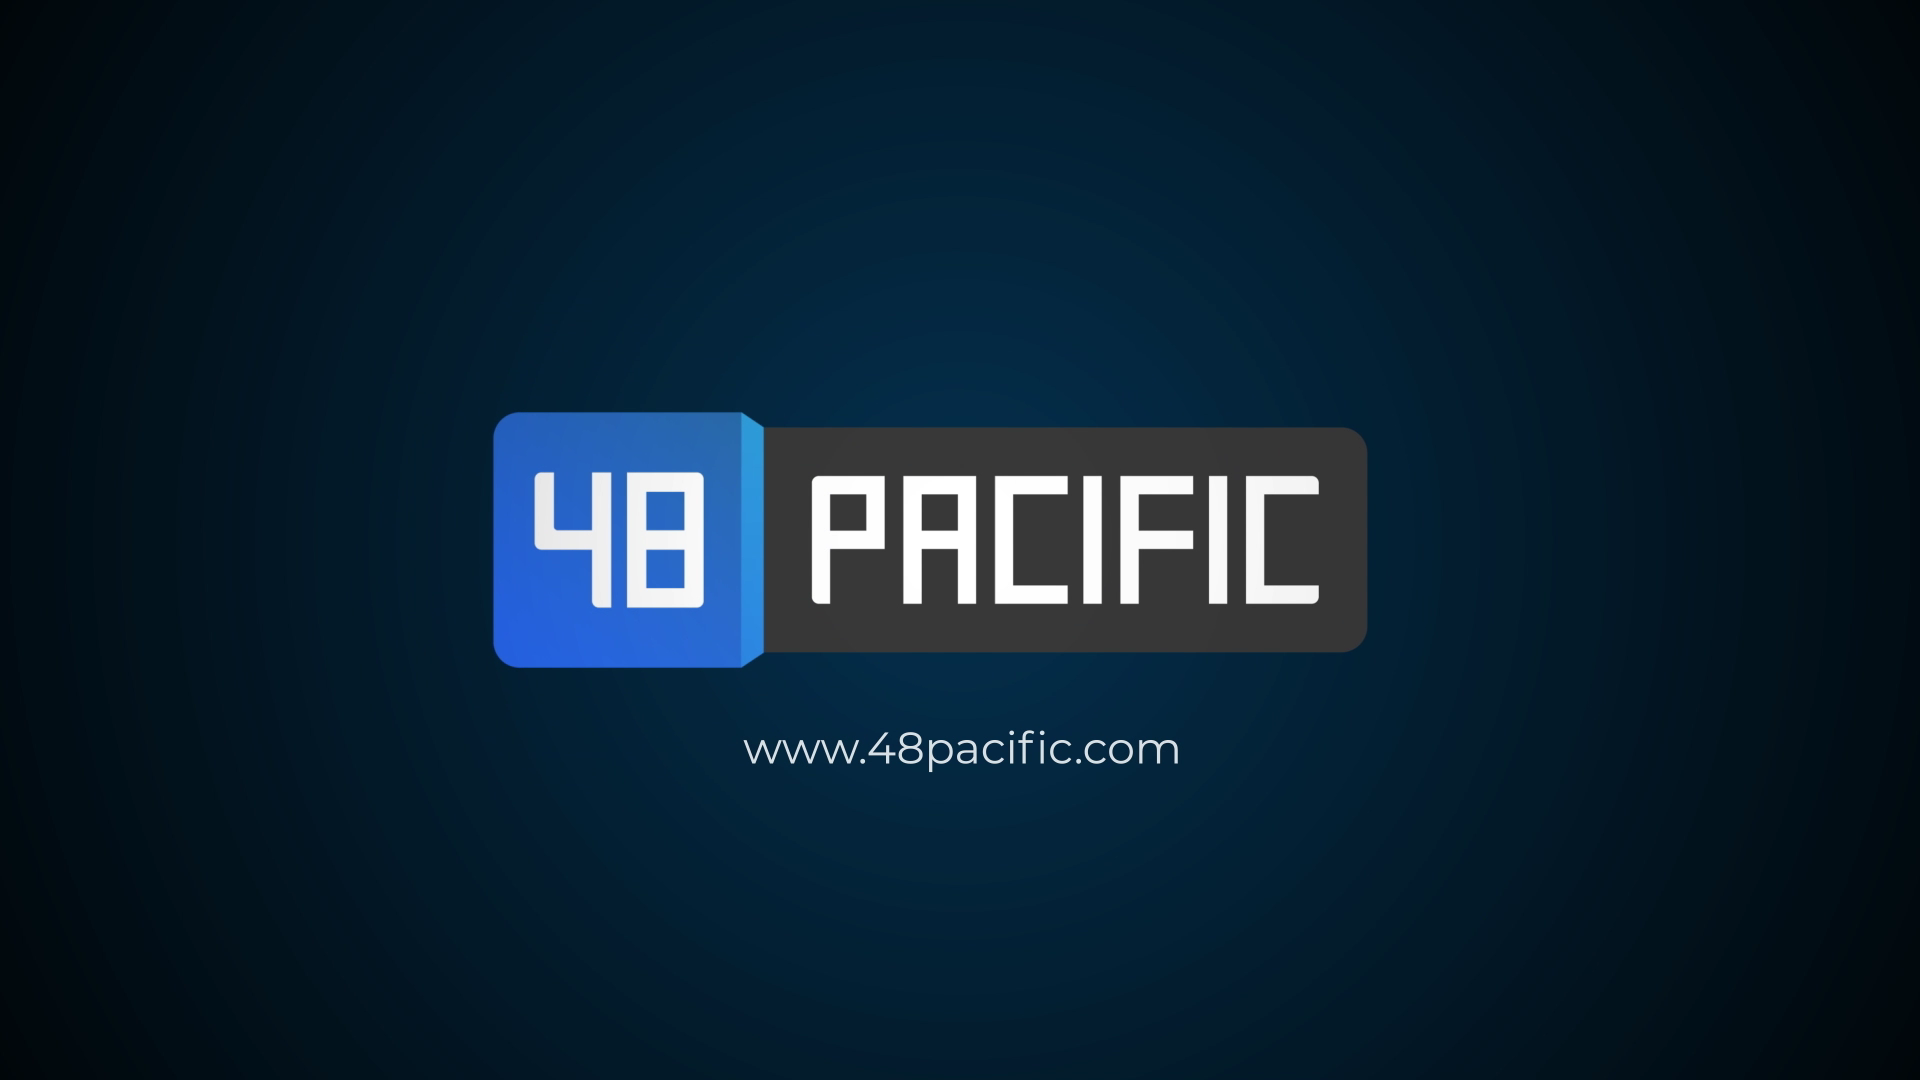 48 Pacific